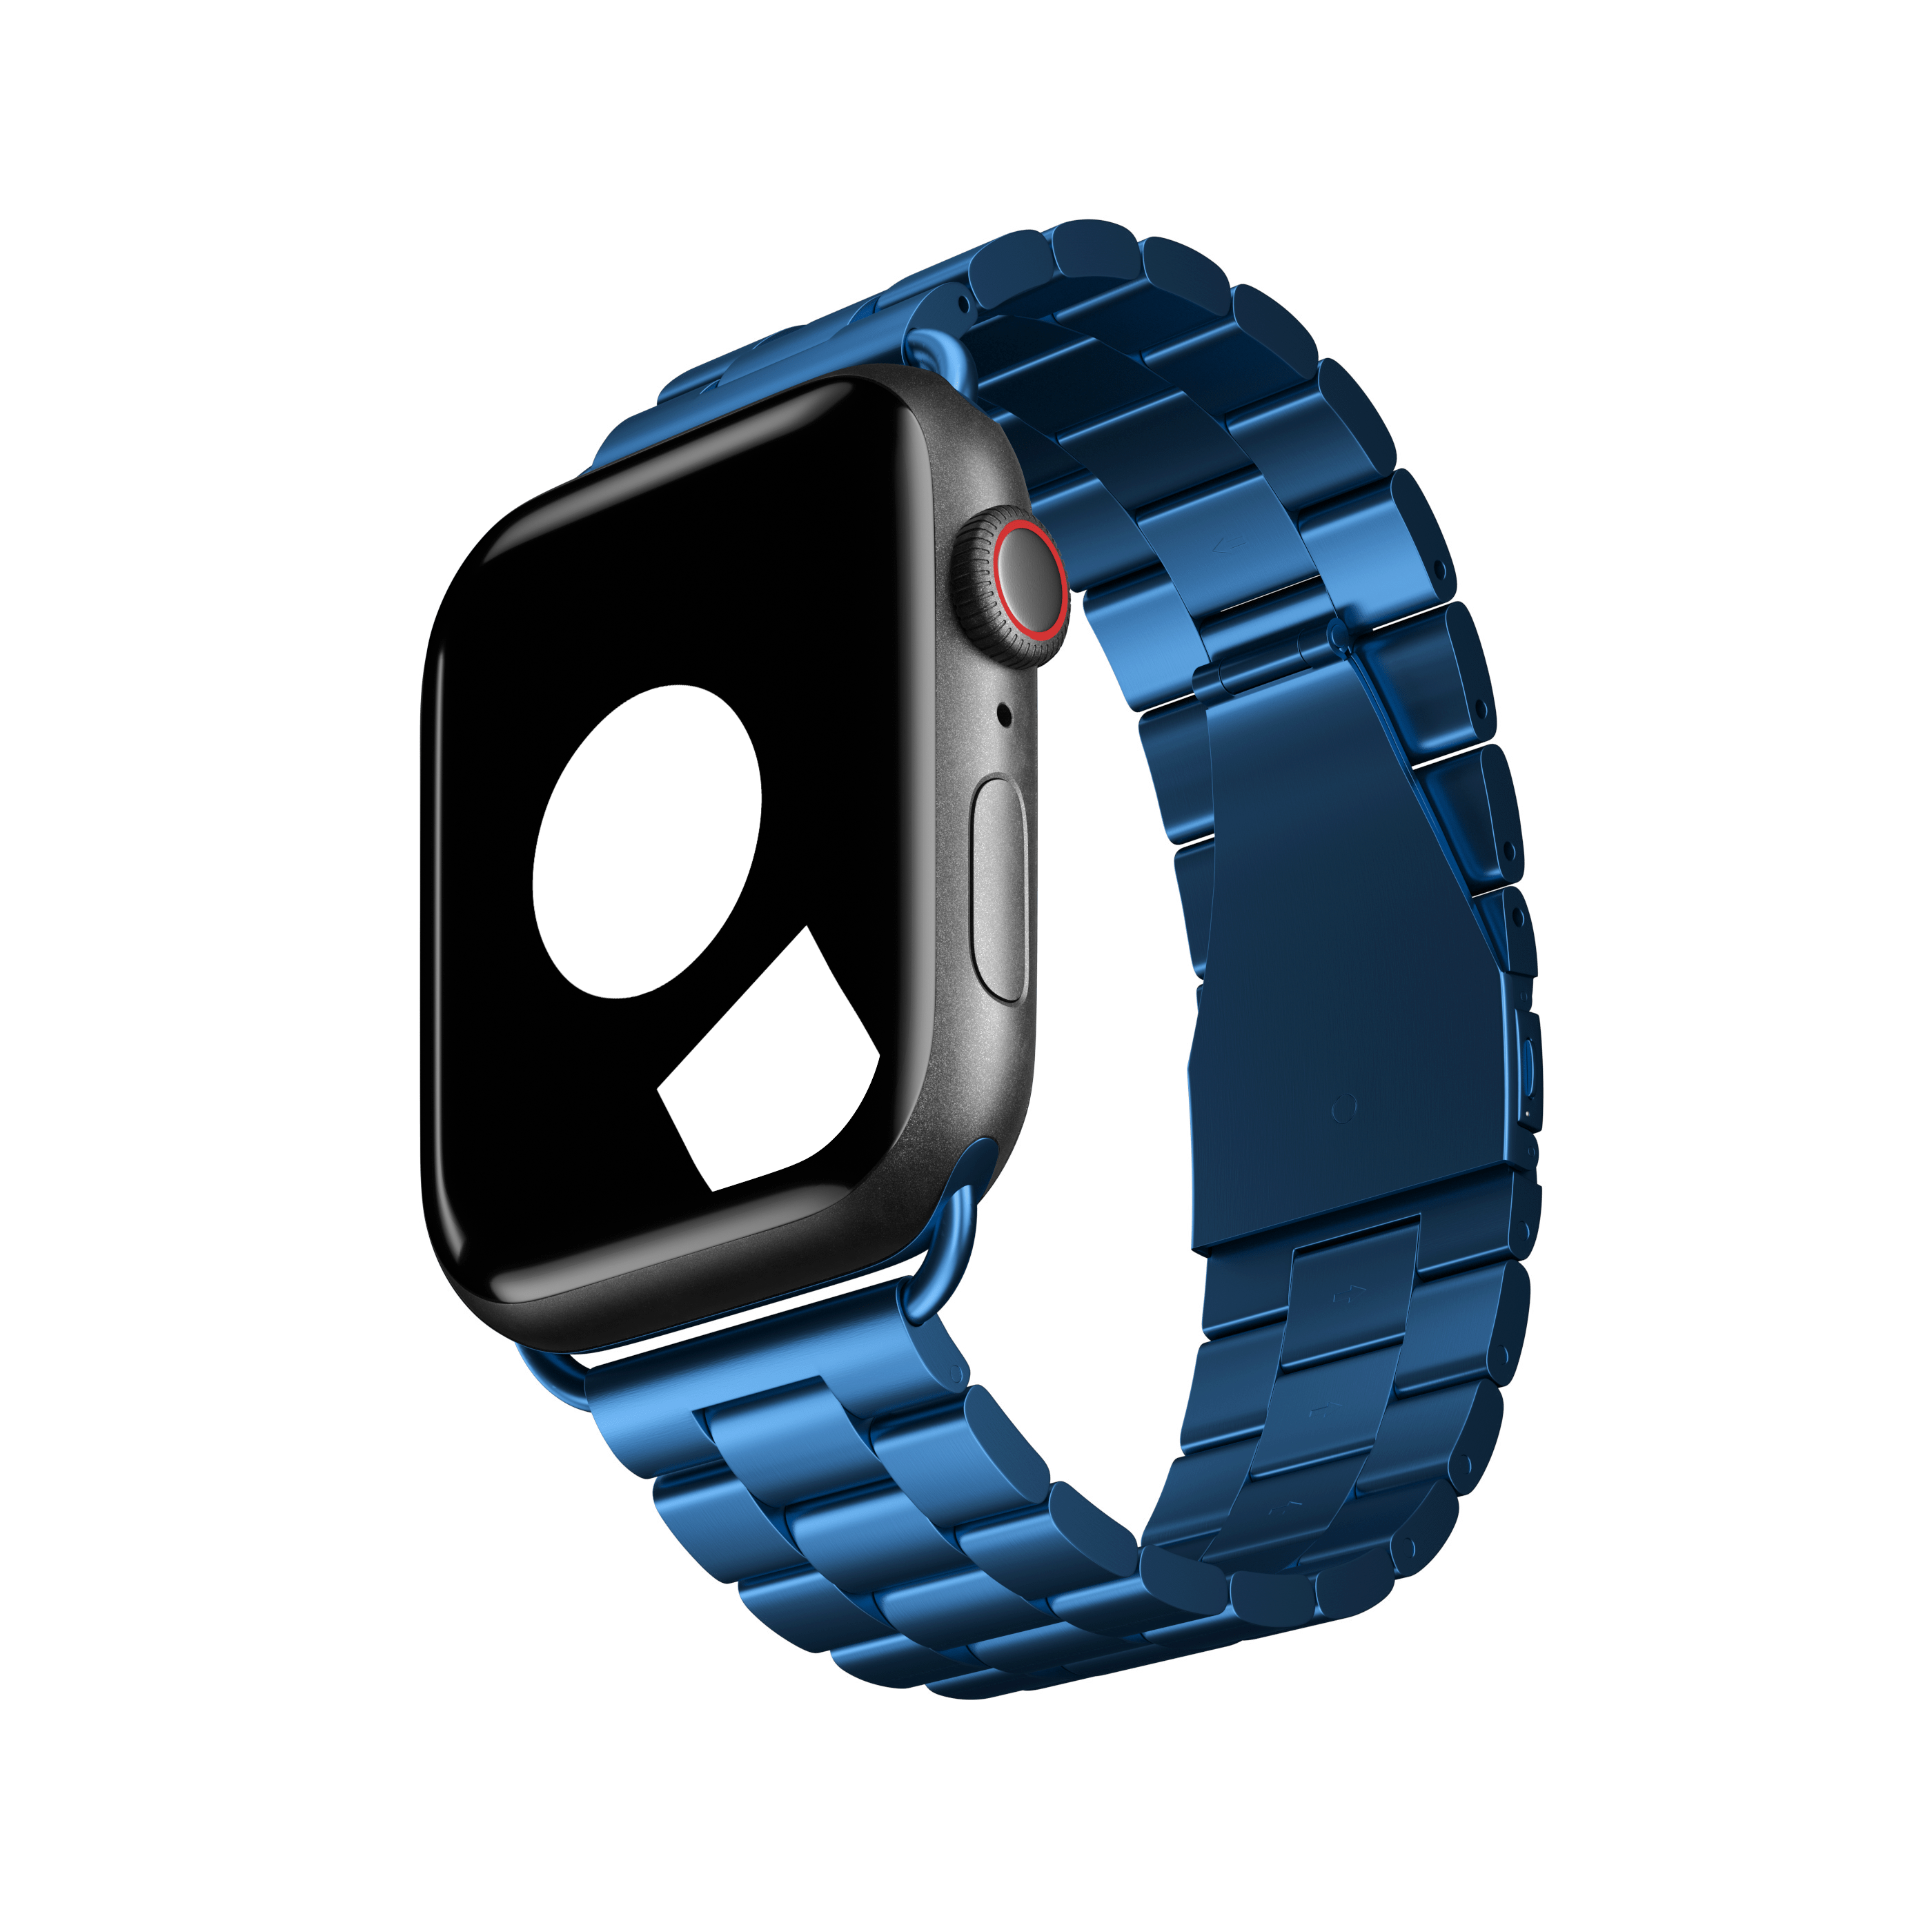 Official Apple Watch Space Black Link Bracelet sees rare $106 discount to  Amazon low